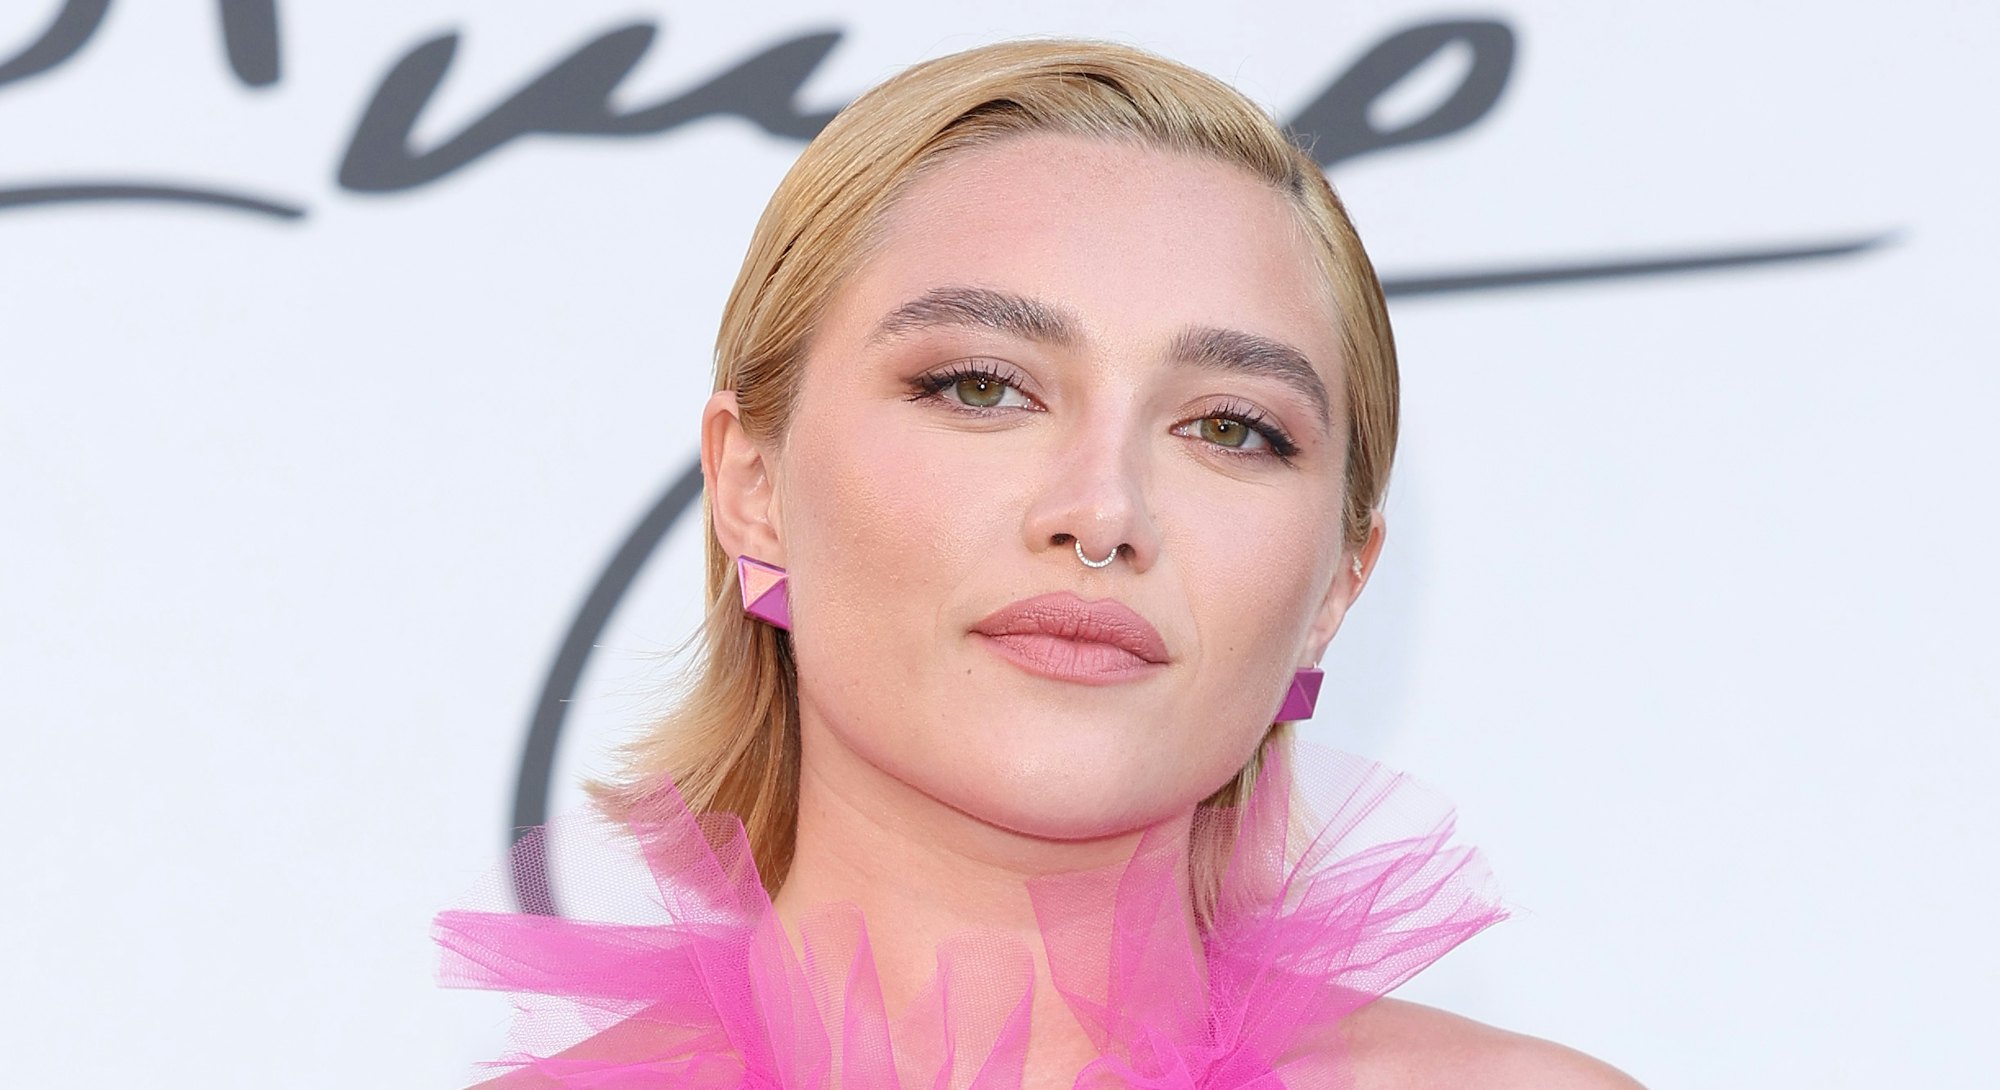 ROME, ITALY - JULY 08: (EDITOR’S NOTE: Image contains nudity.) Florence Pugh is seen arriving at the...